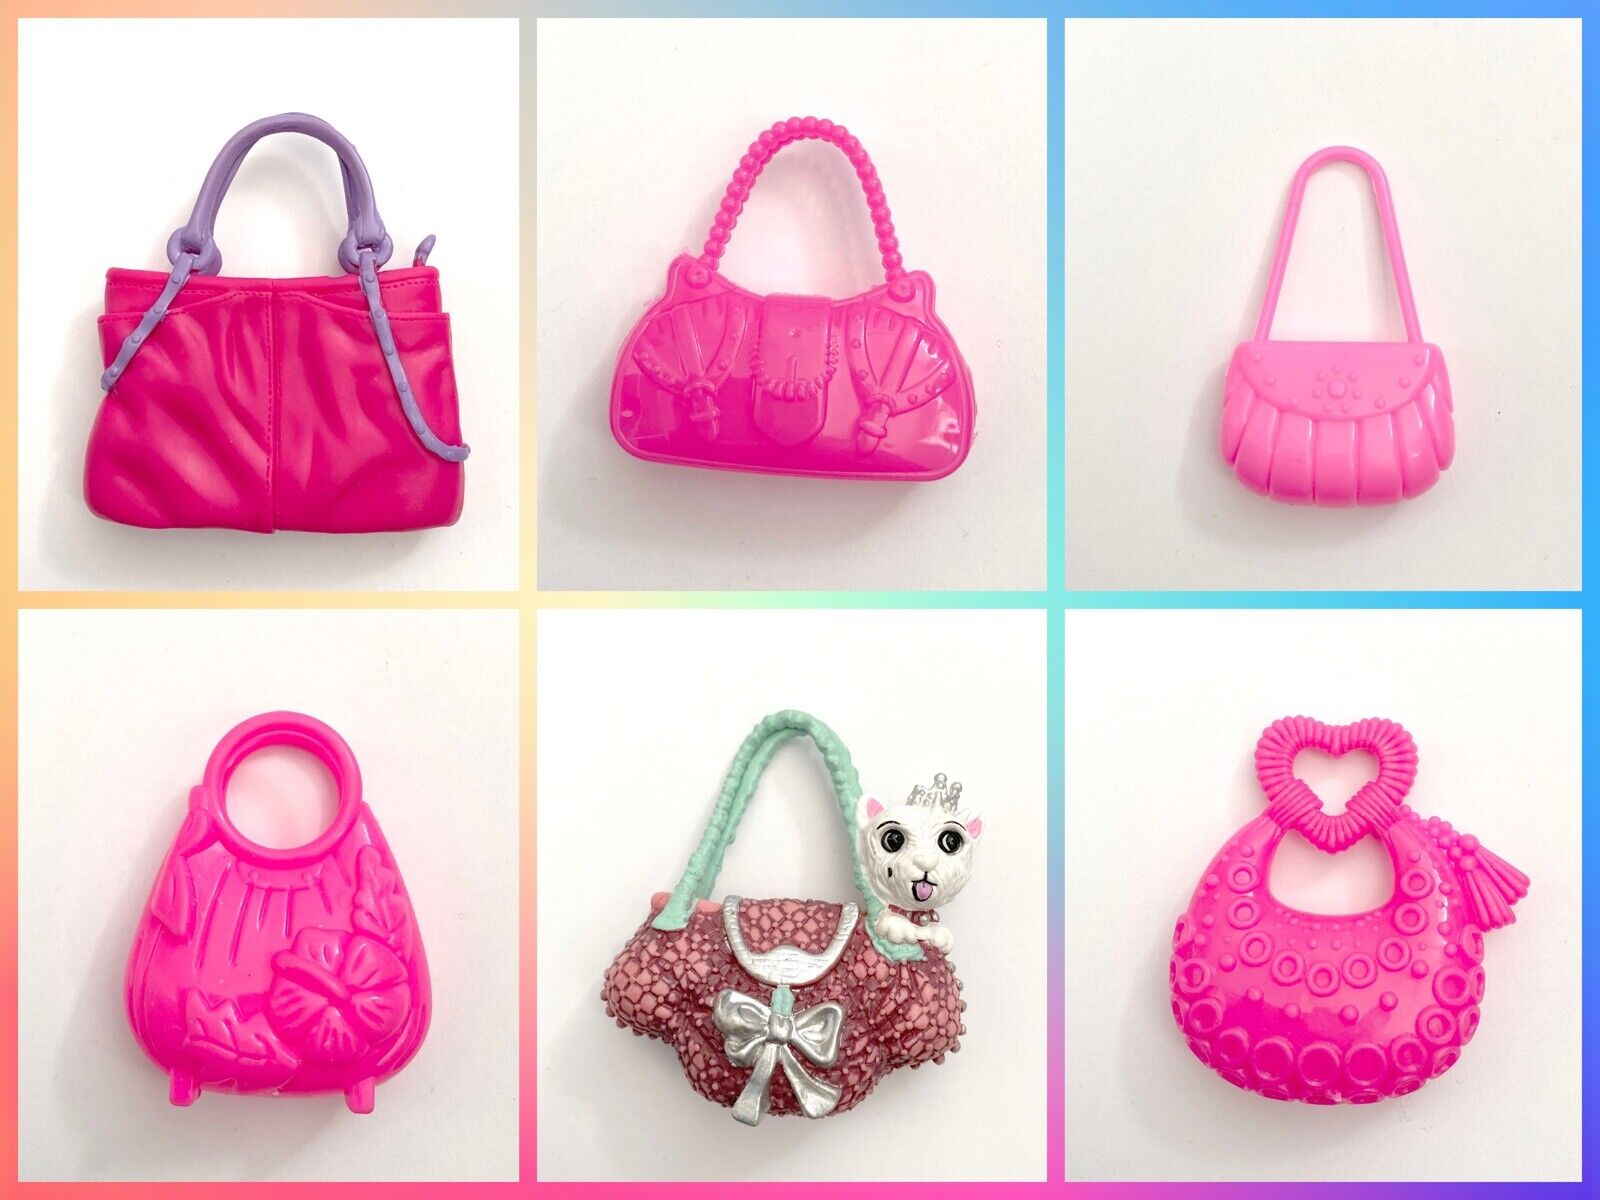 Bag for Barbie several models new doll gift collection fashion royalty